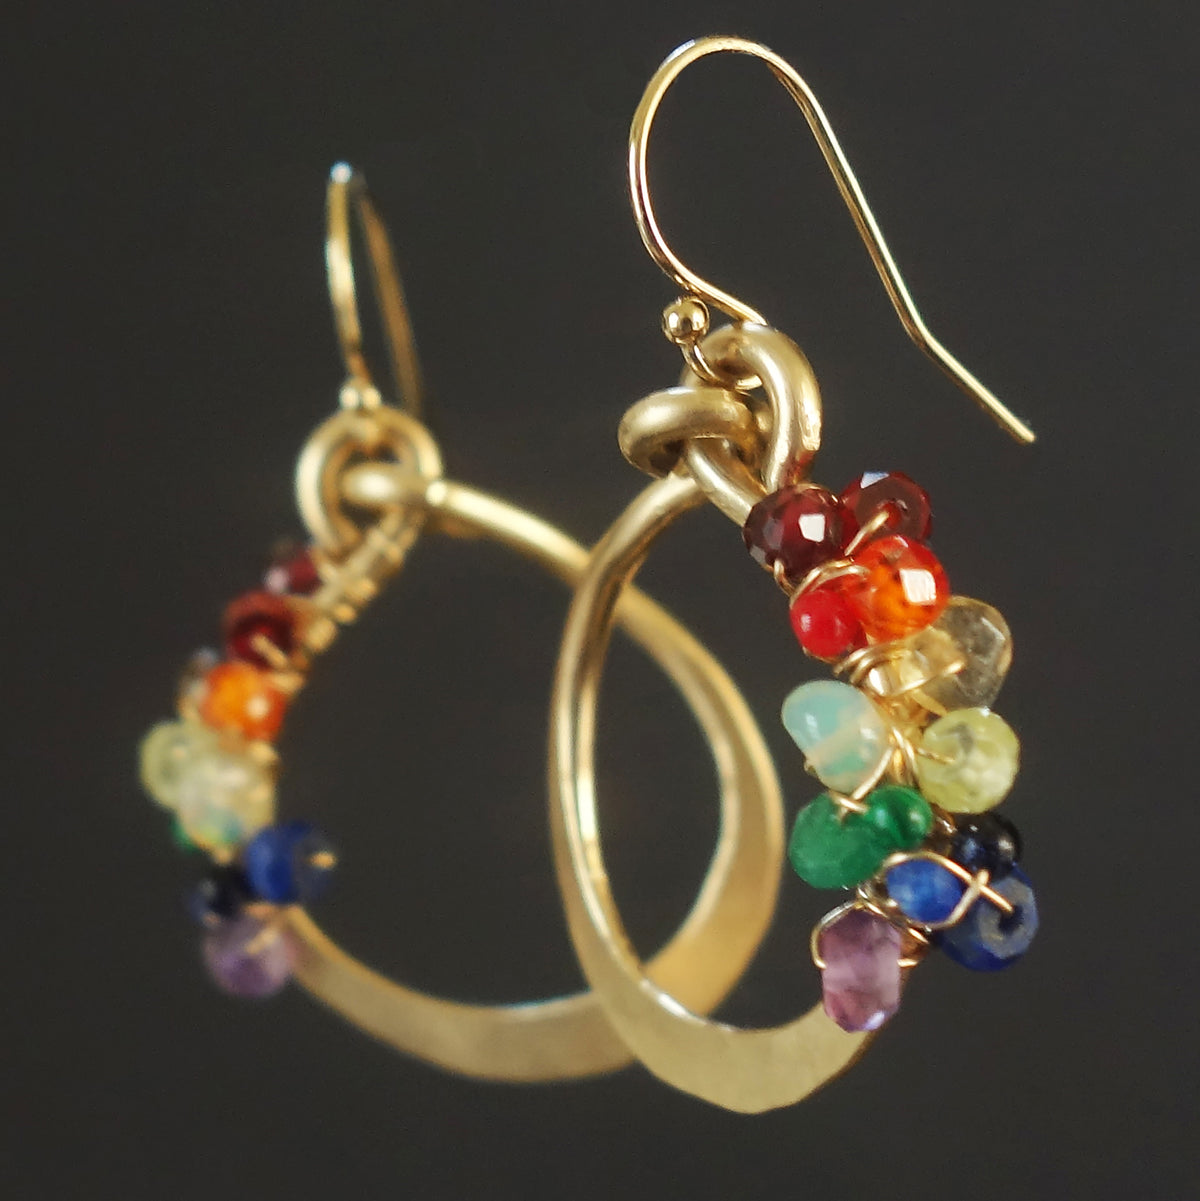 Color my World hand hammered gold earrings